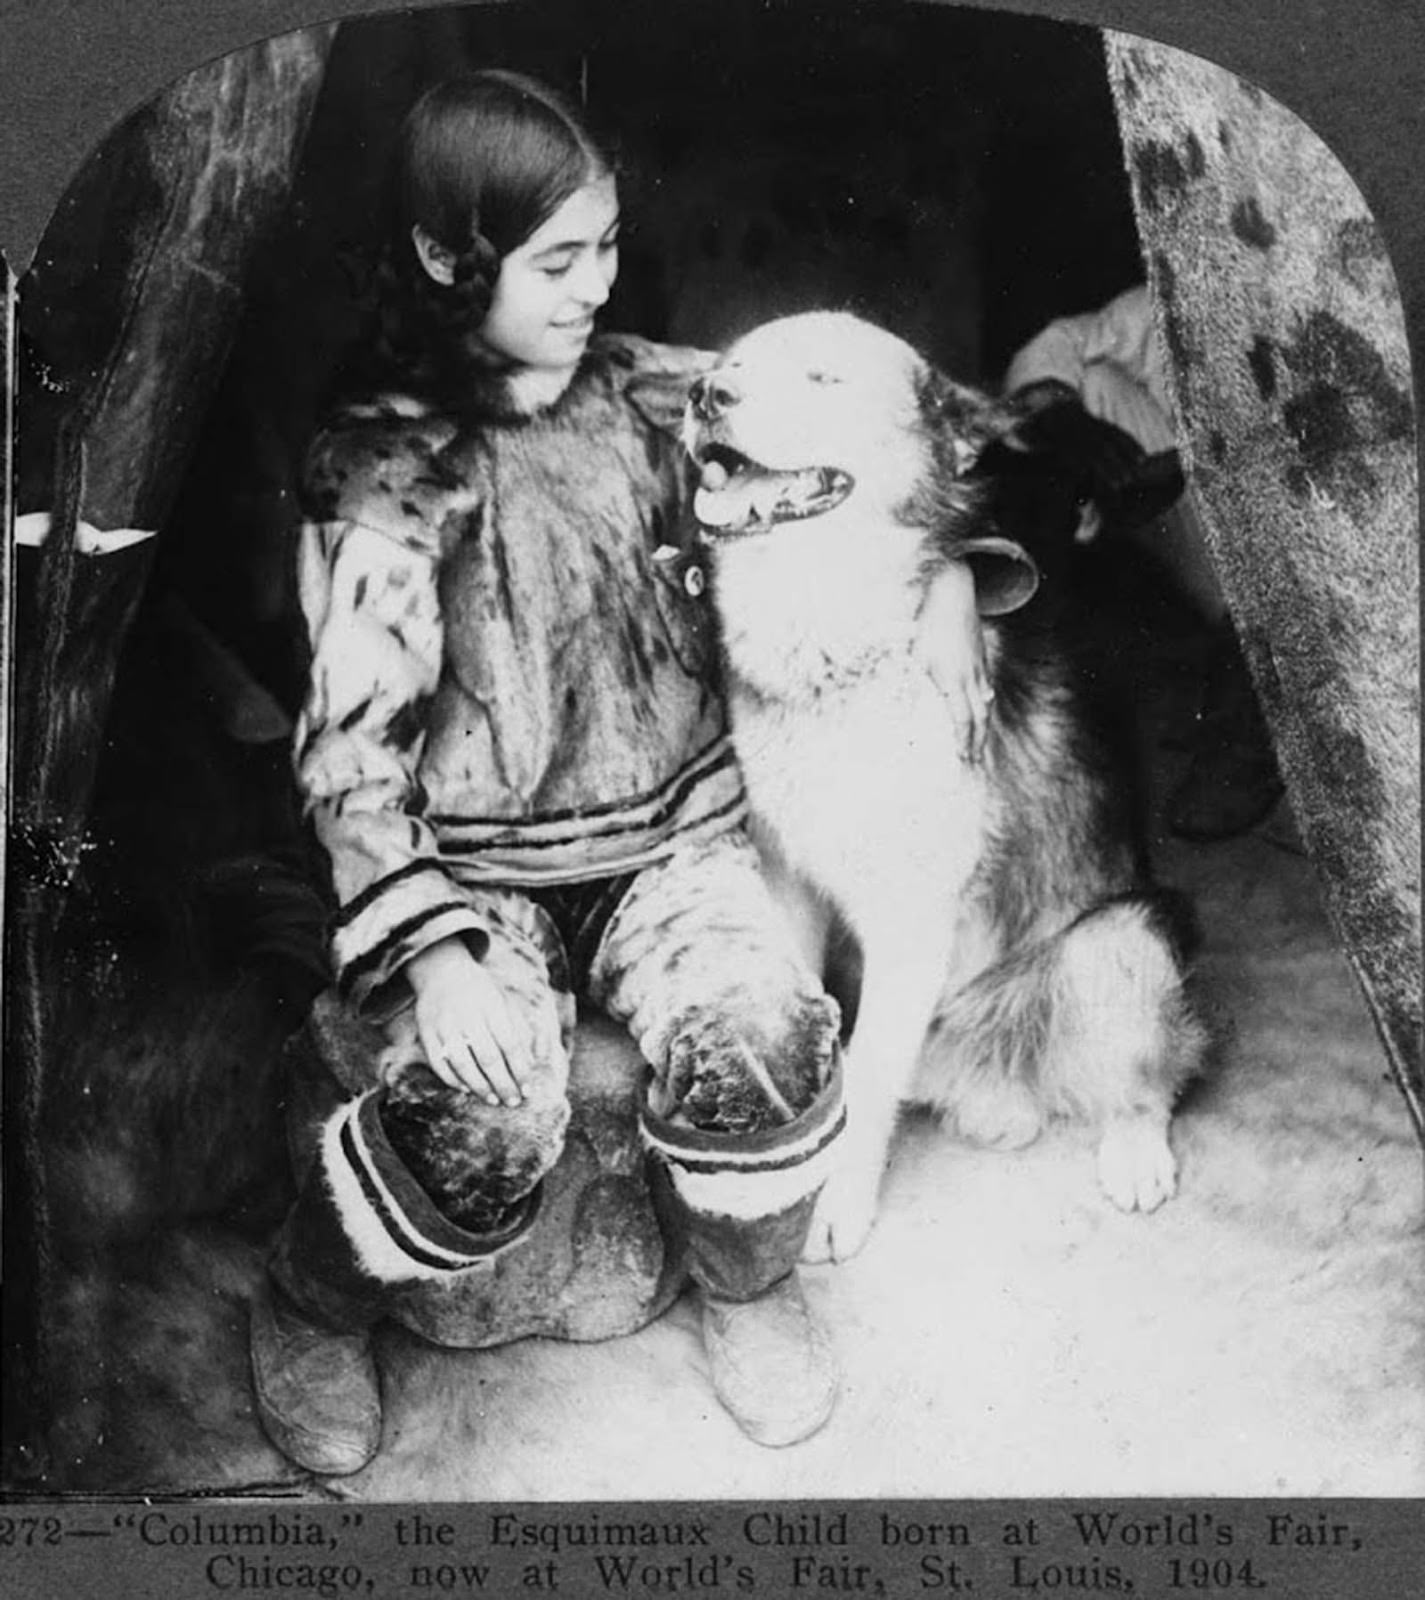 This Eskimo child, with a dog, was born at World’s Fair in Chicago and is pictured after being transferred to World’s Fair, St. Louis in 1904.